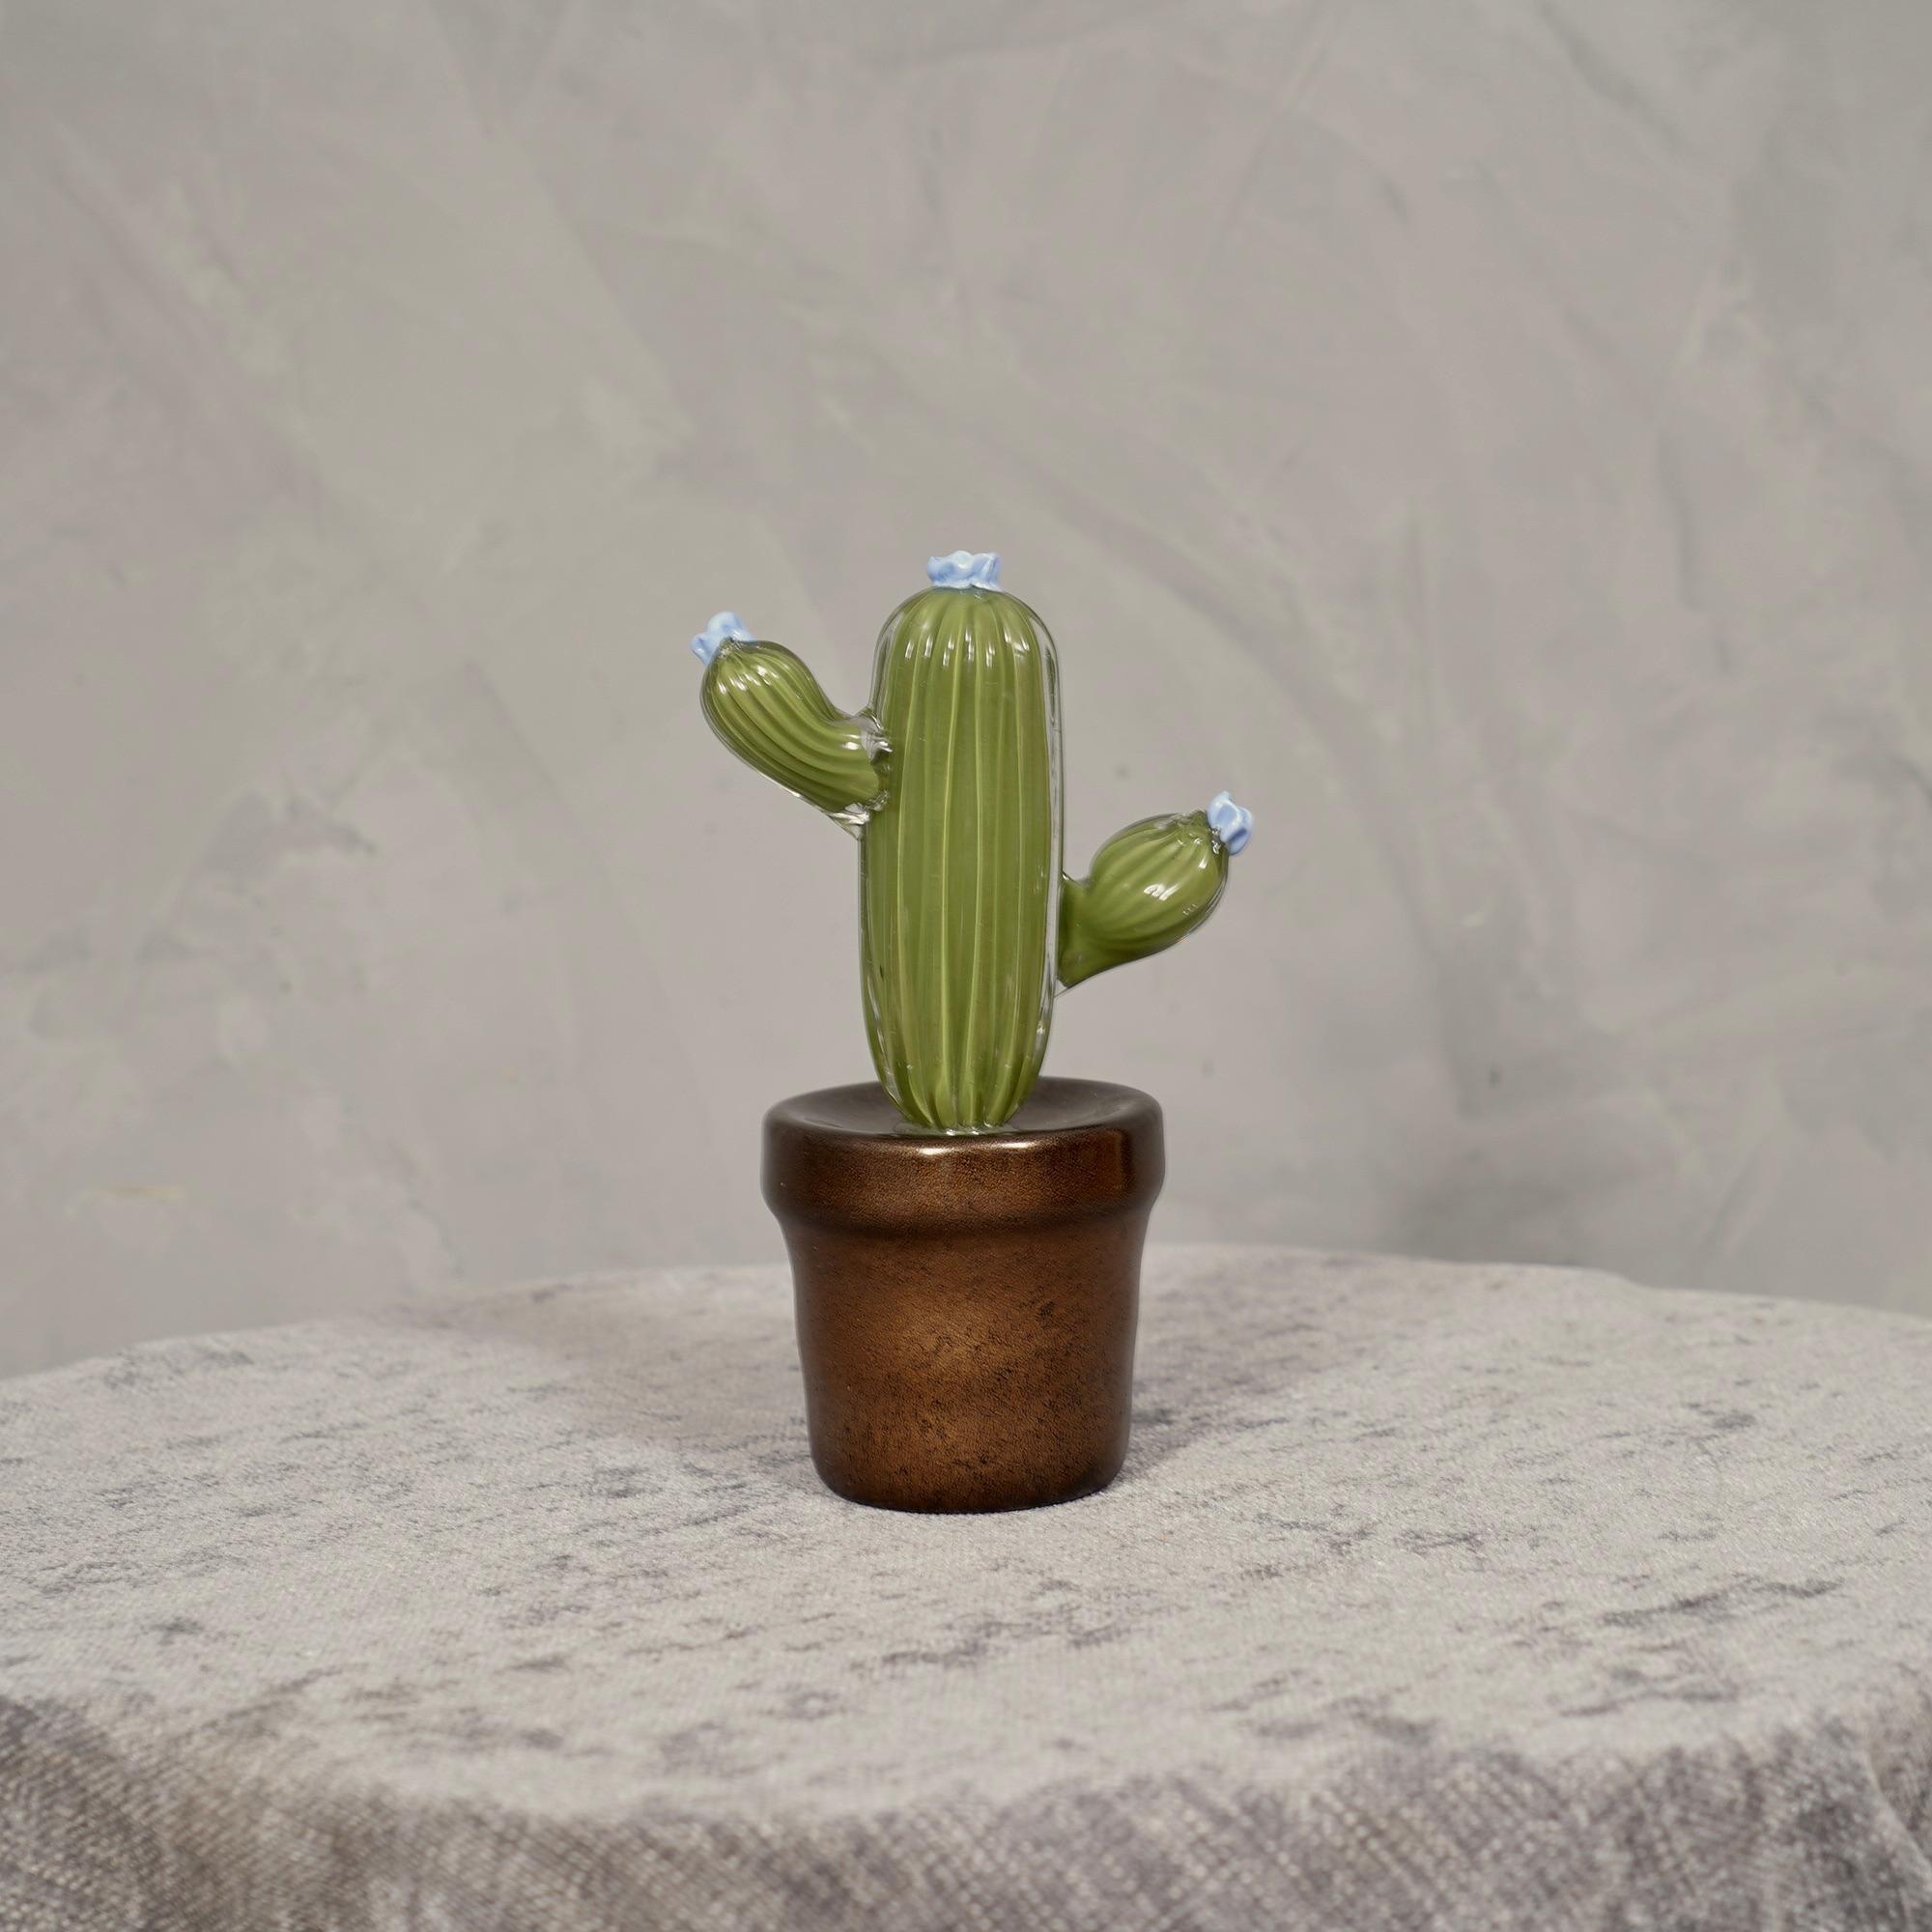 Italian design, this cactus is a fashion icon of the Italian style, olive green with a beautiful green glass vase underneath.

In limited edition, manufactured in one of the furnaces in Venice, the cacti are in Murano glass have a vase in green